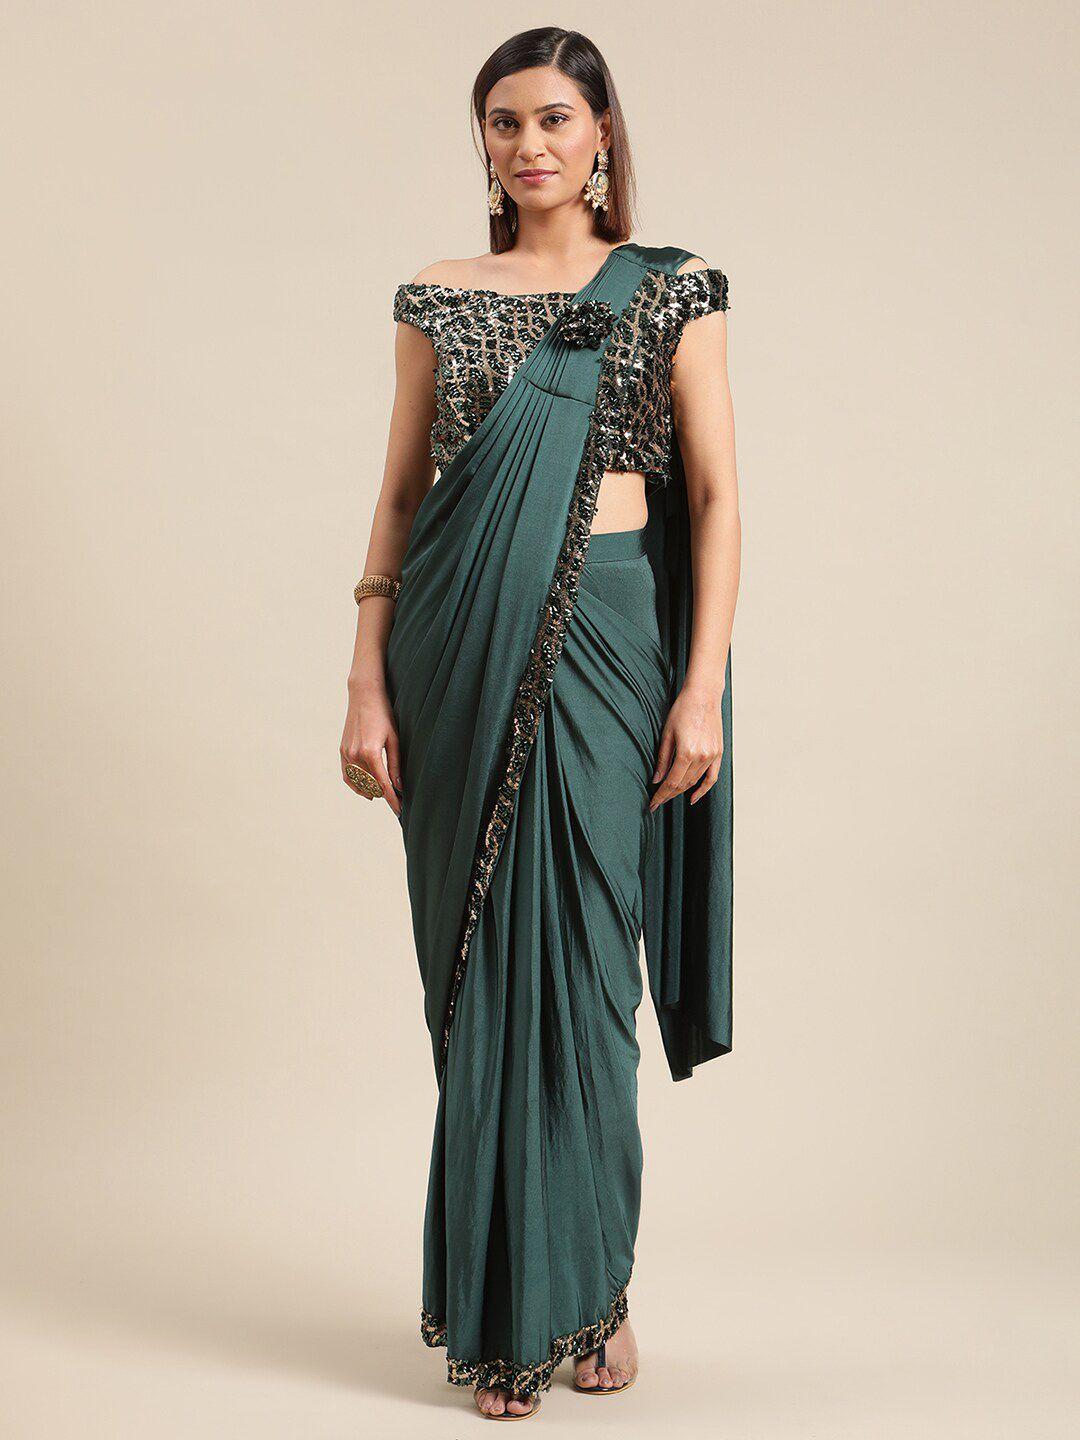 grancy green embellished ready to wear saree